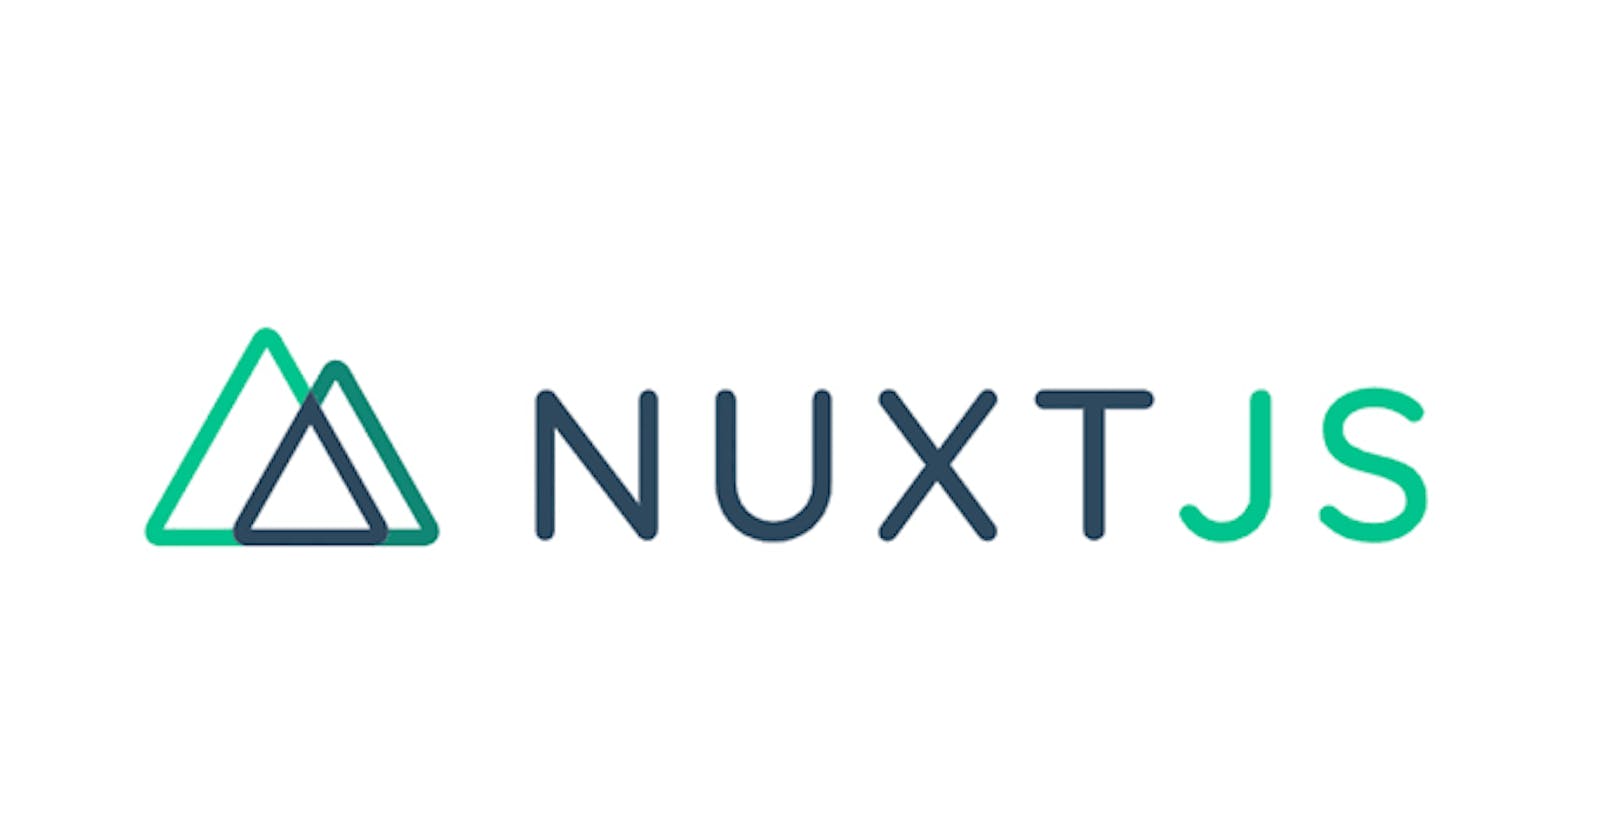 Getting Started With Nuxt.js - The How & Why